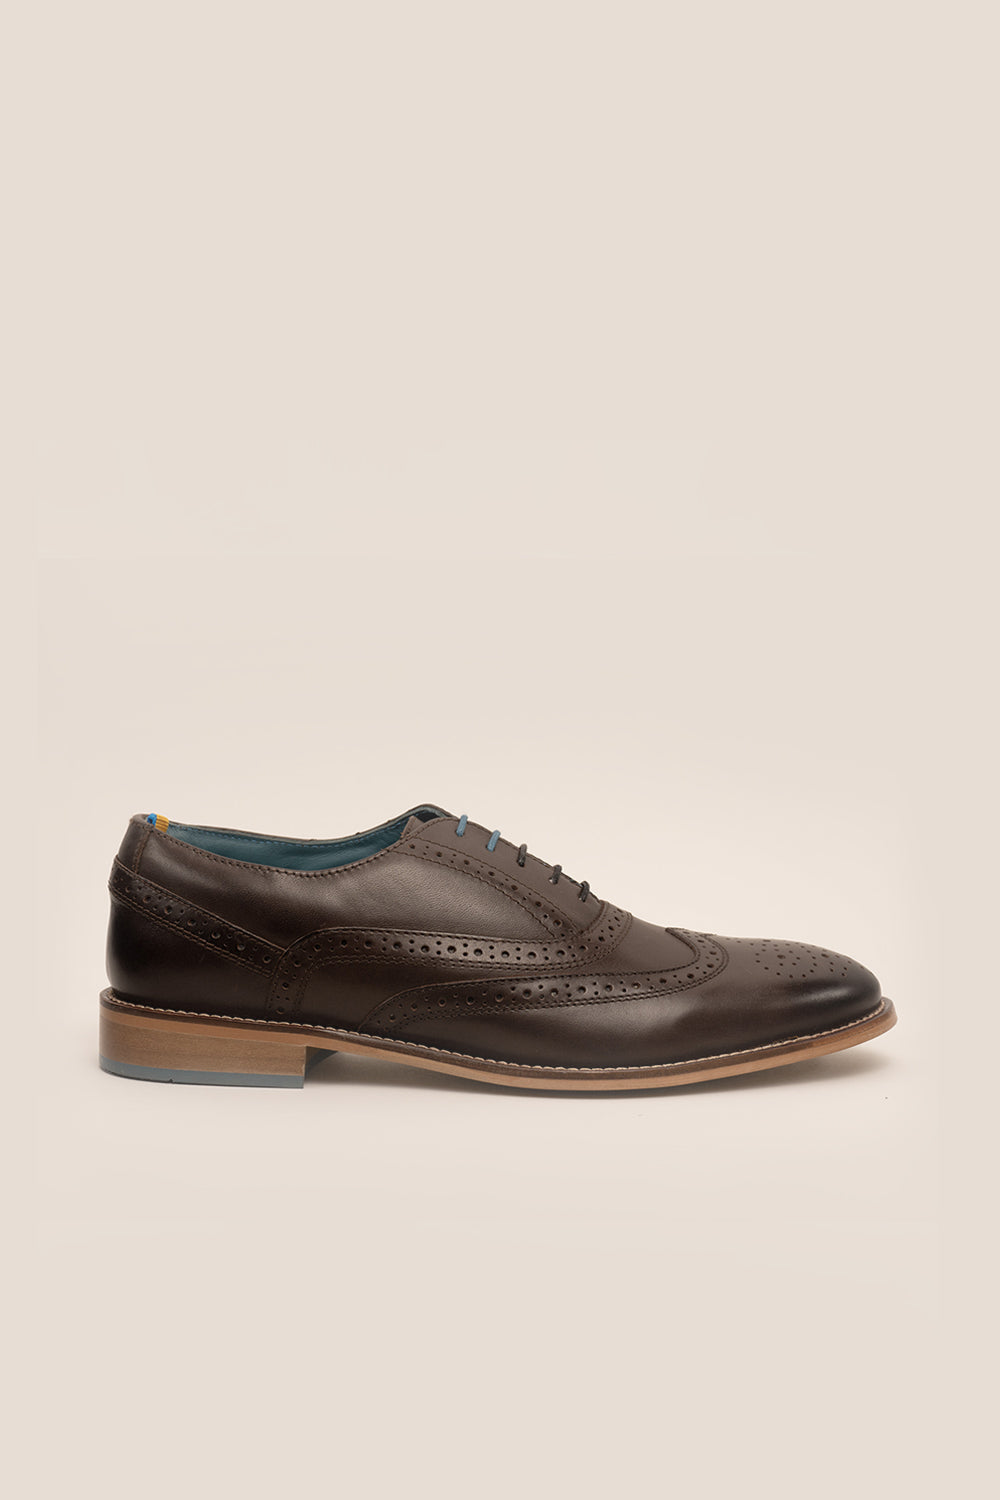 Winston Brown Mens Leather Oxford Brogue Shoes | Oswin Hyde